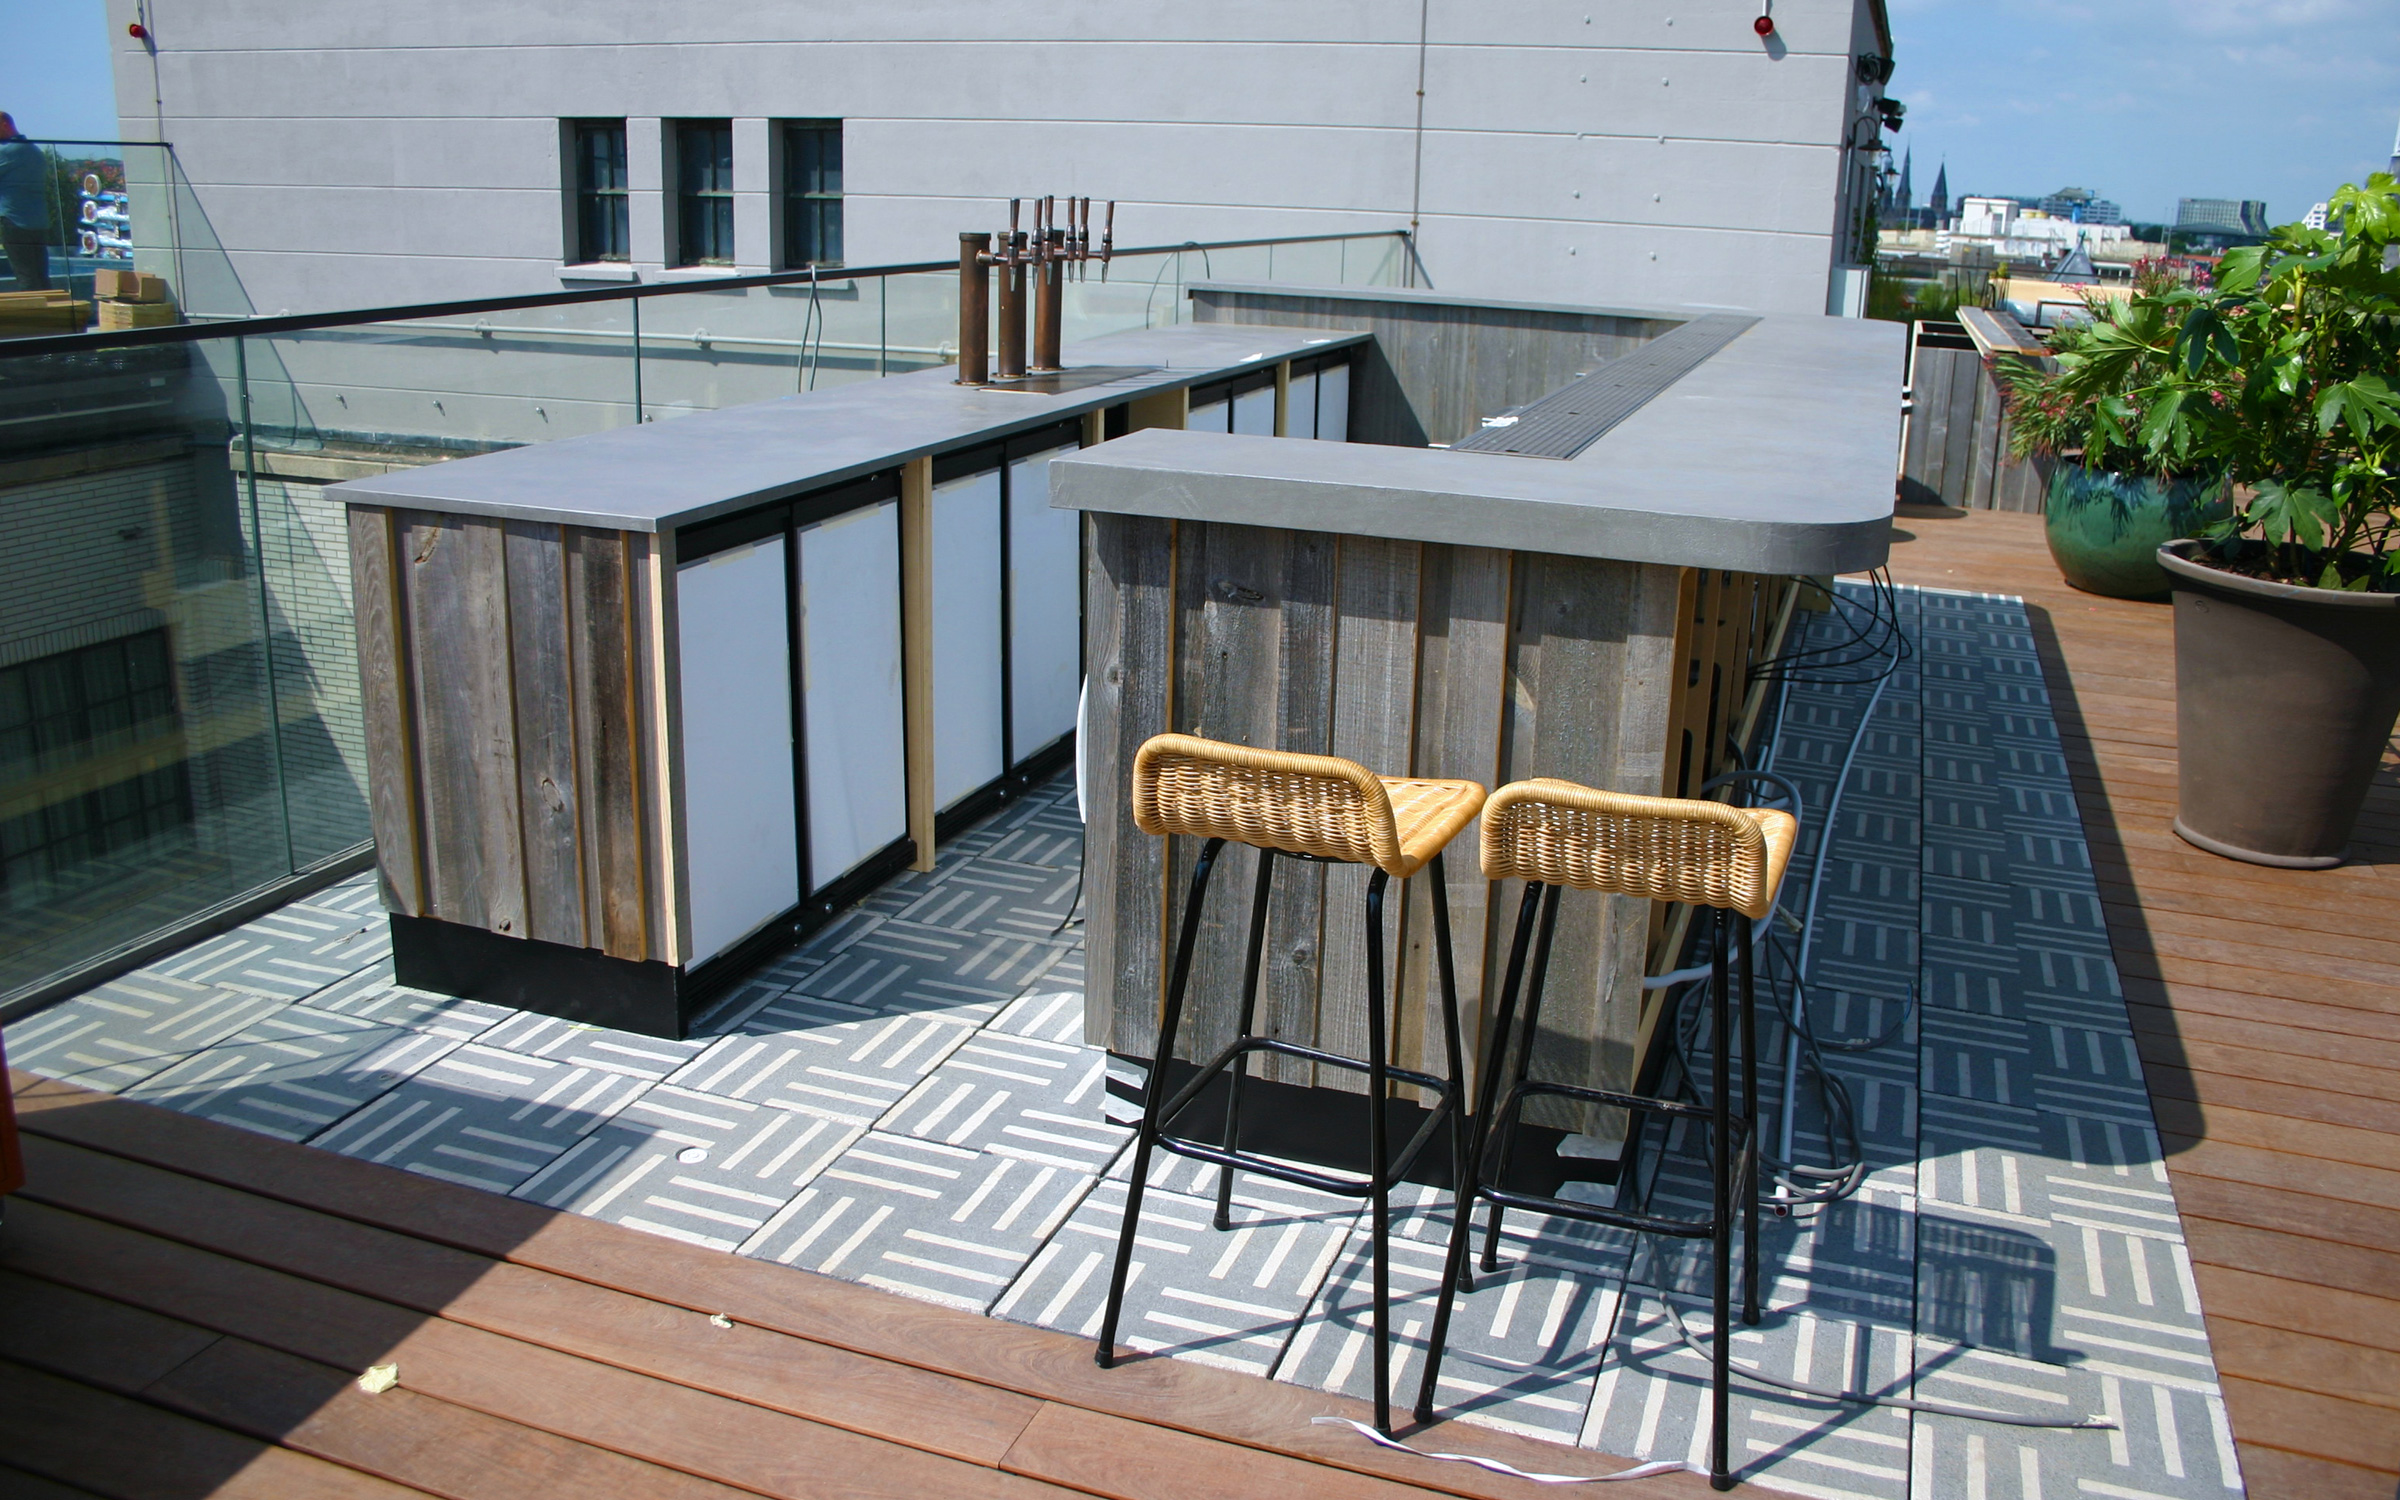 Roof garden with a bar